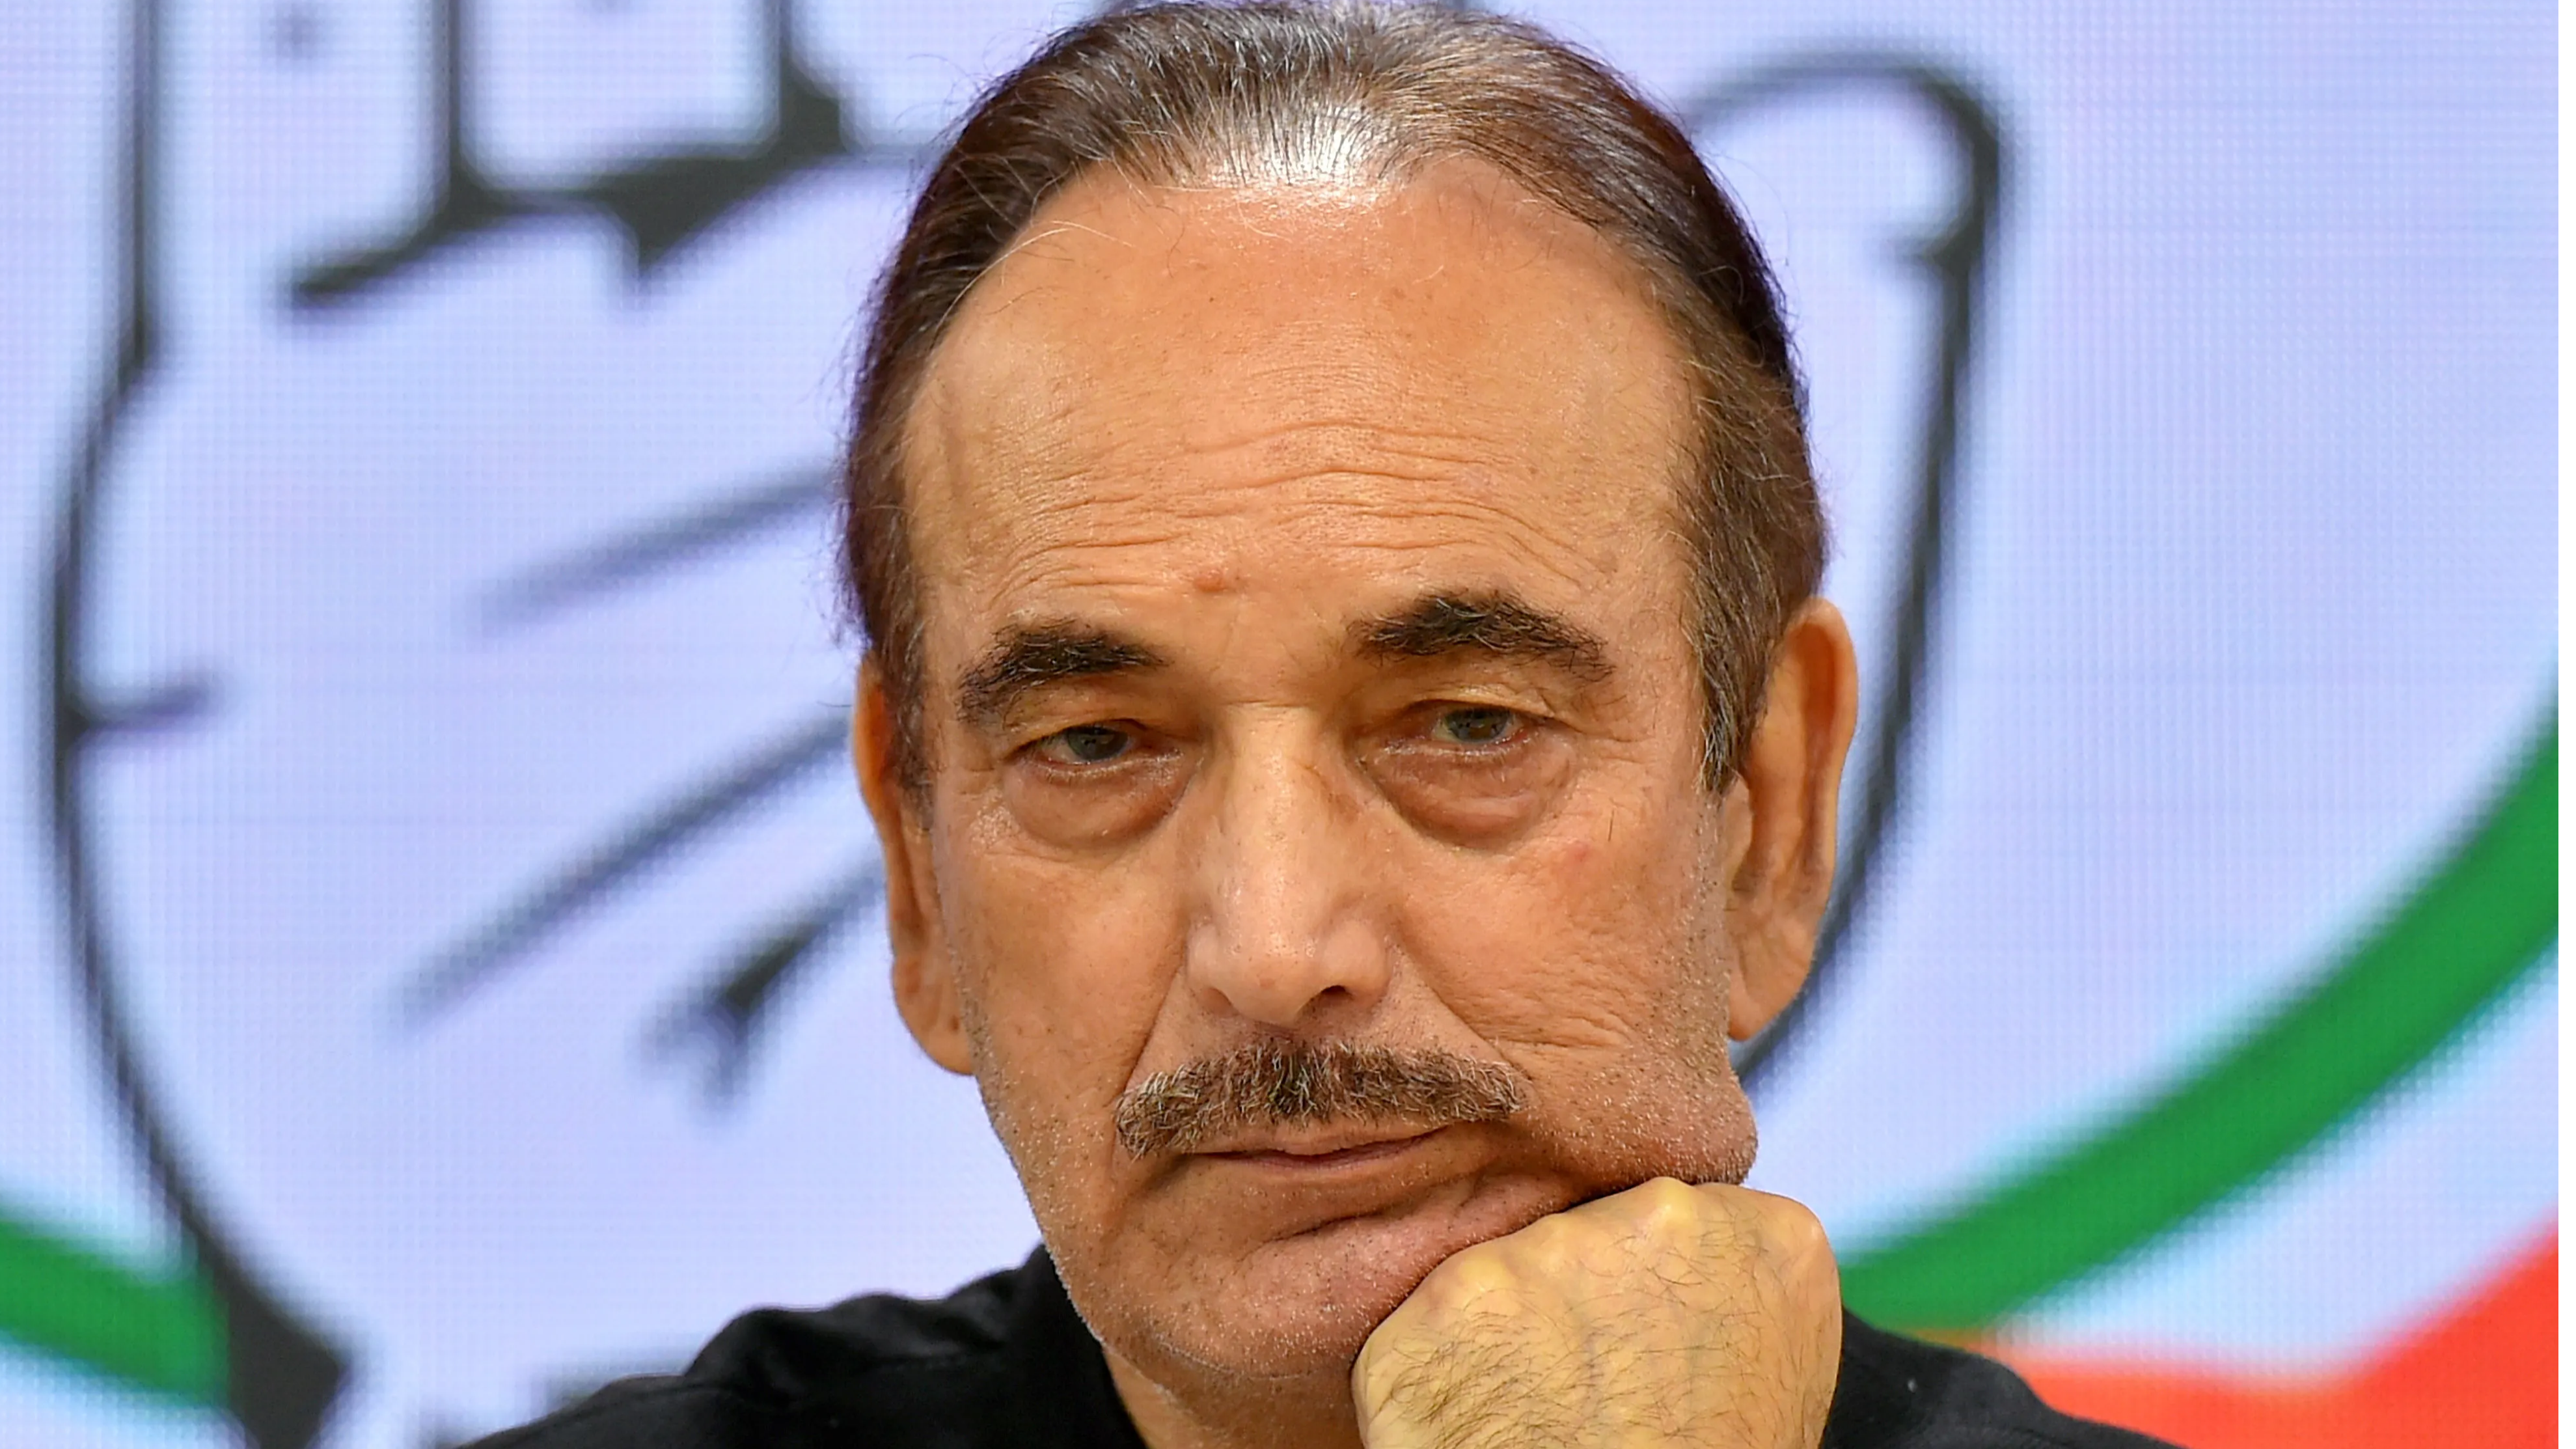 Sonia spoke to Azad after fiery CWC meet, said ‘concerns will be addressed’